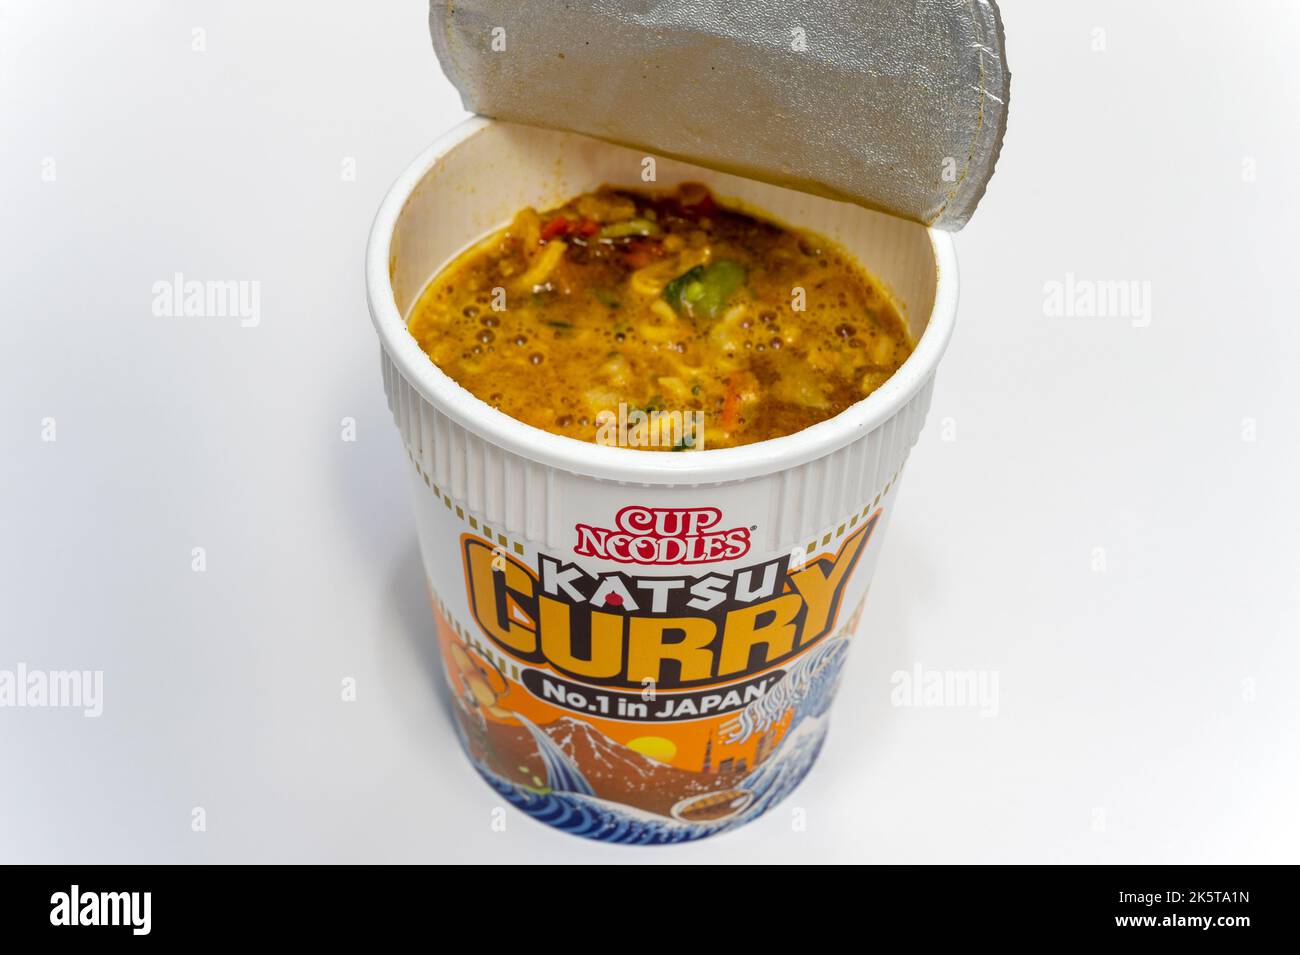 Cup Noodles Katsu Curry Stock Photo